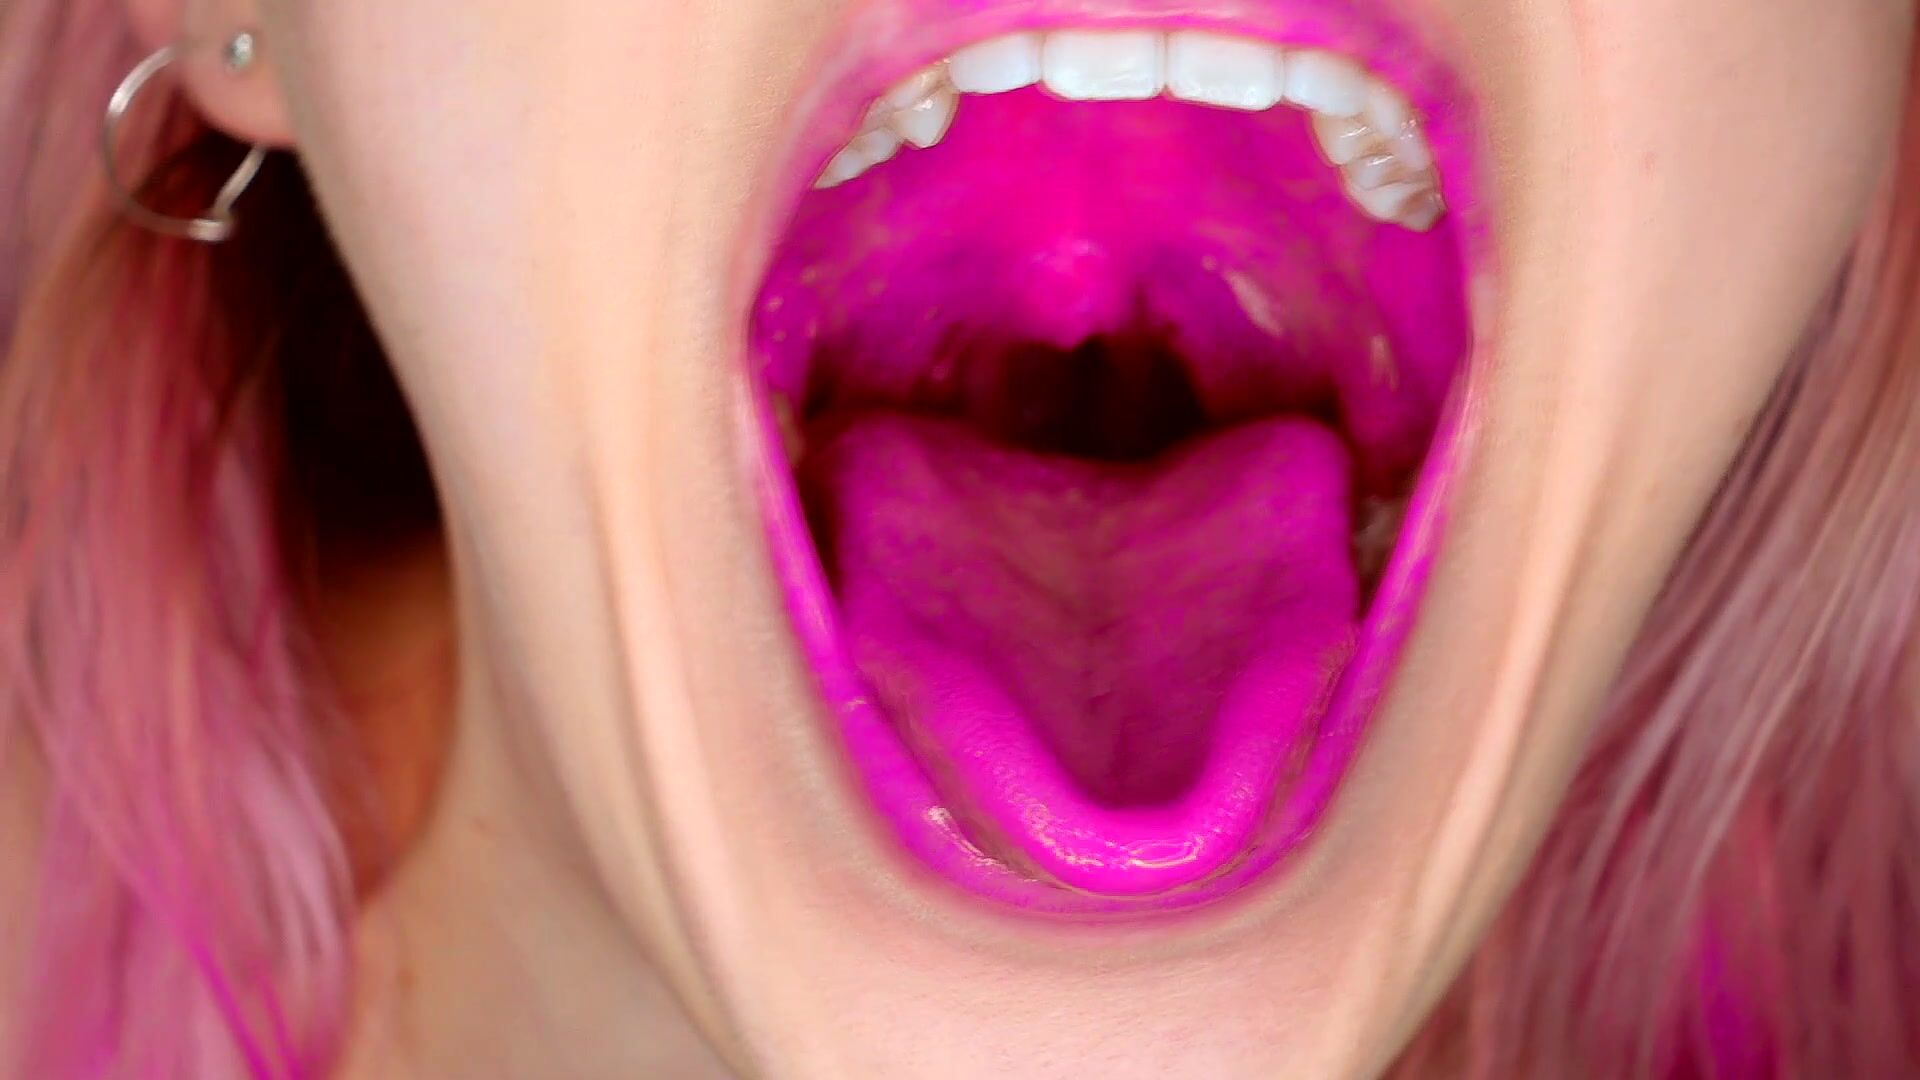 Sofie Skye- pink mouth throat close up